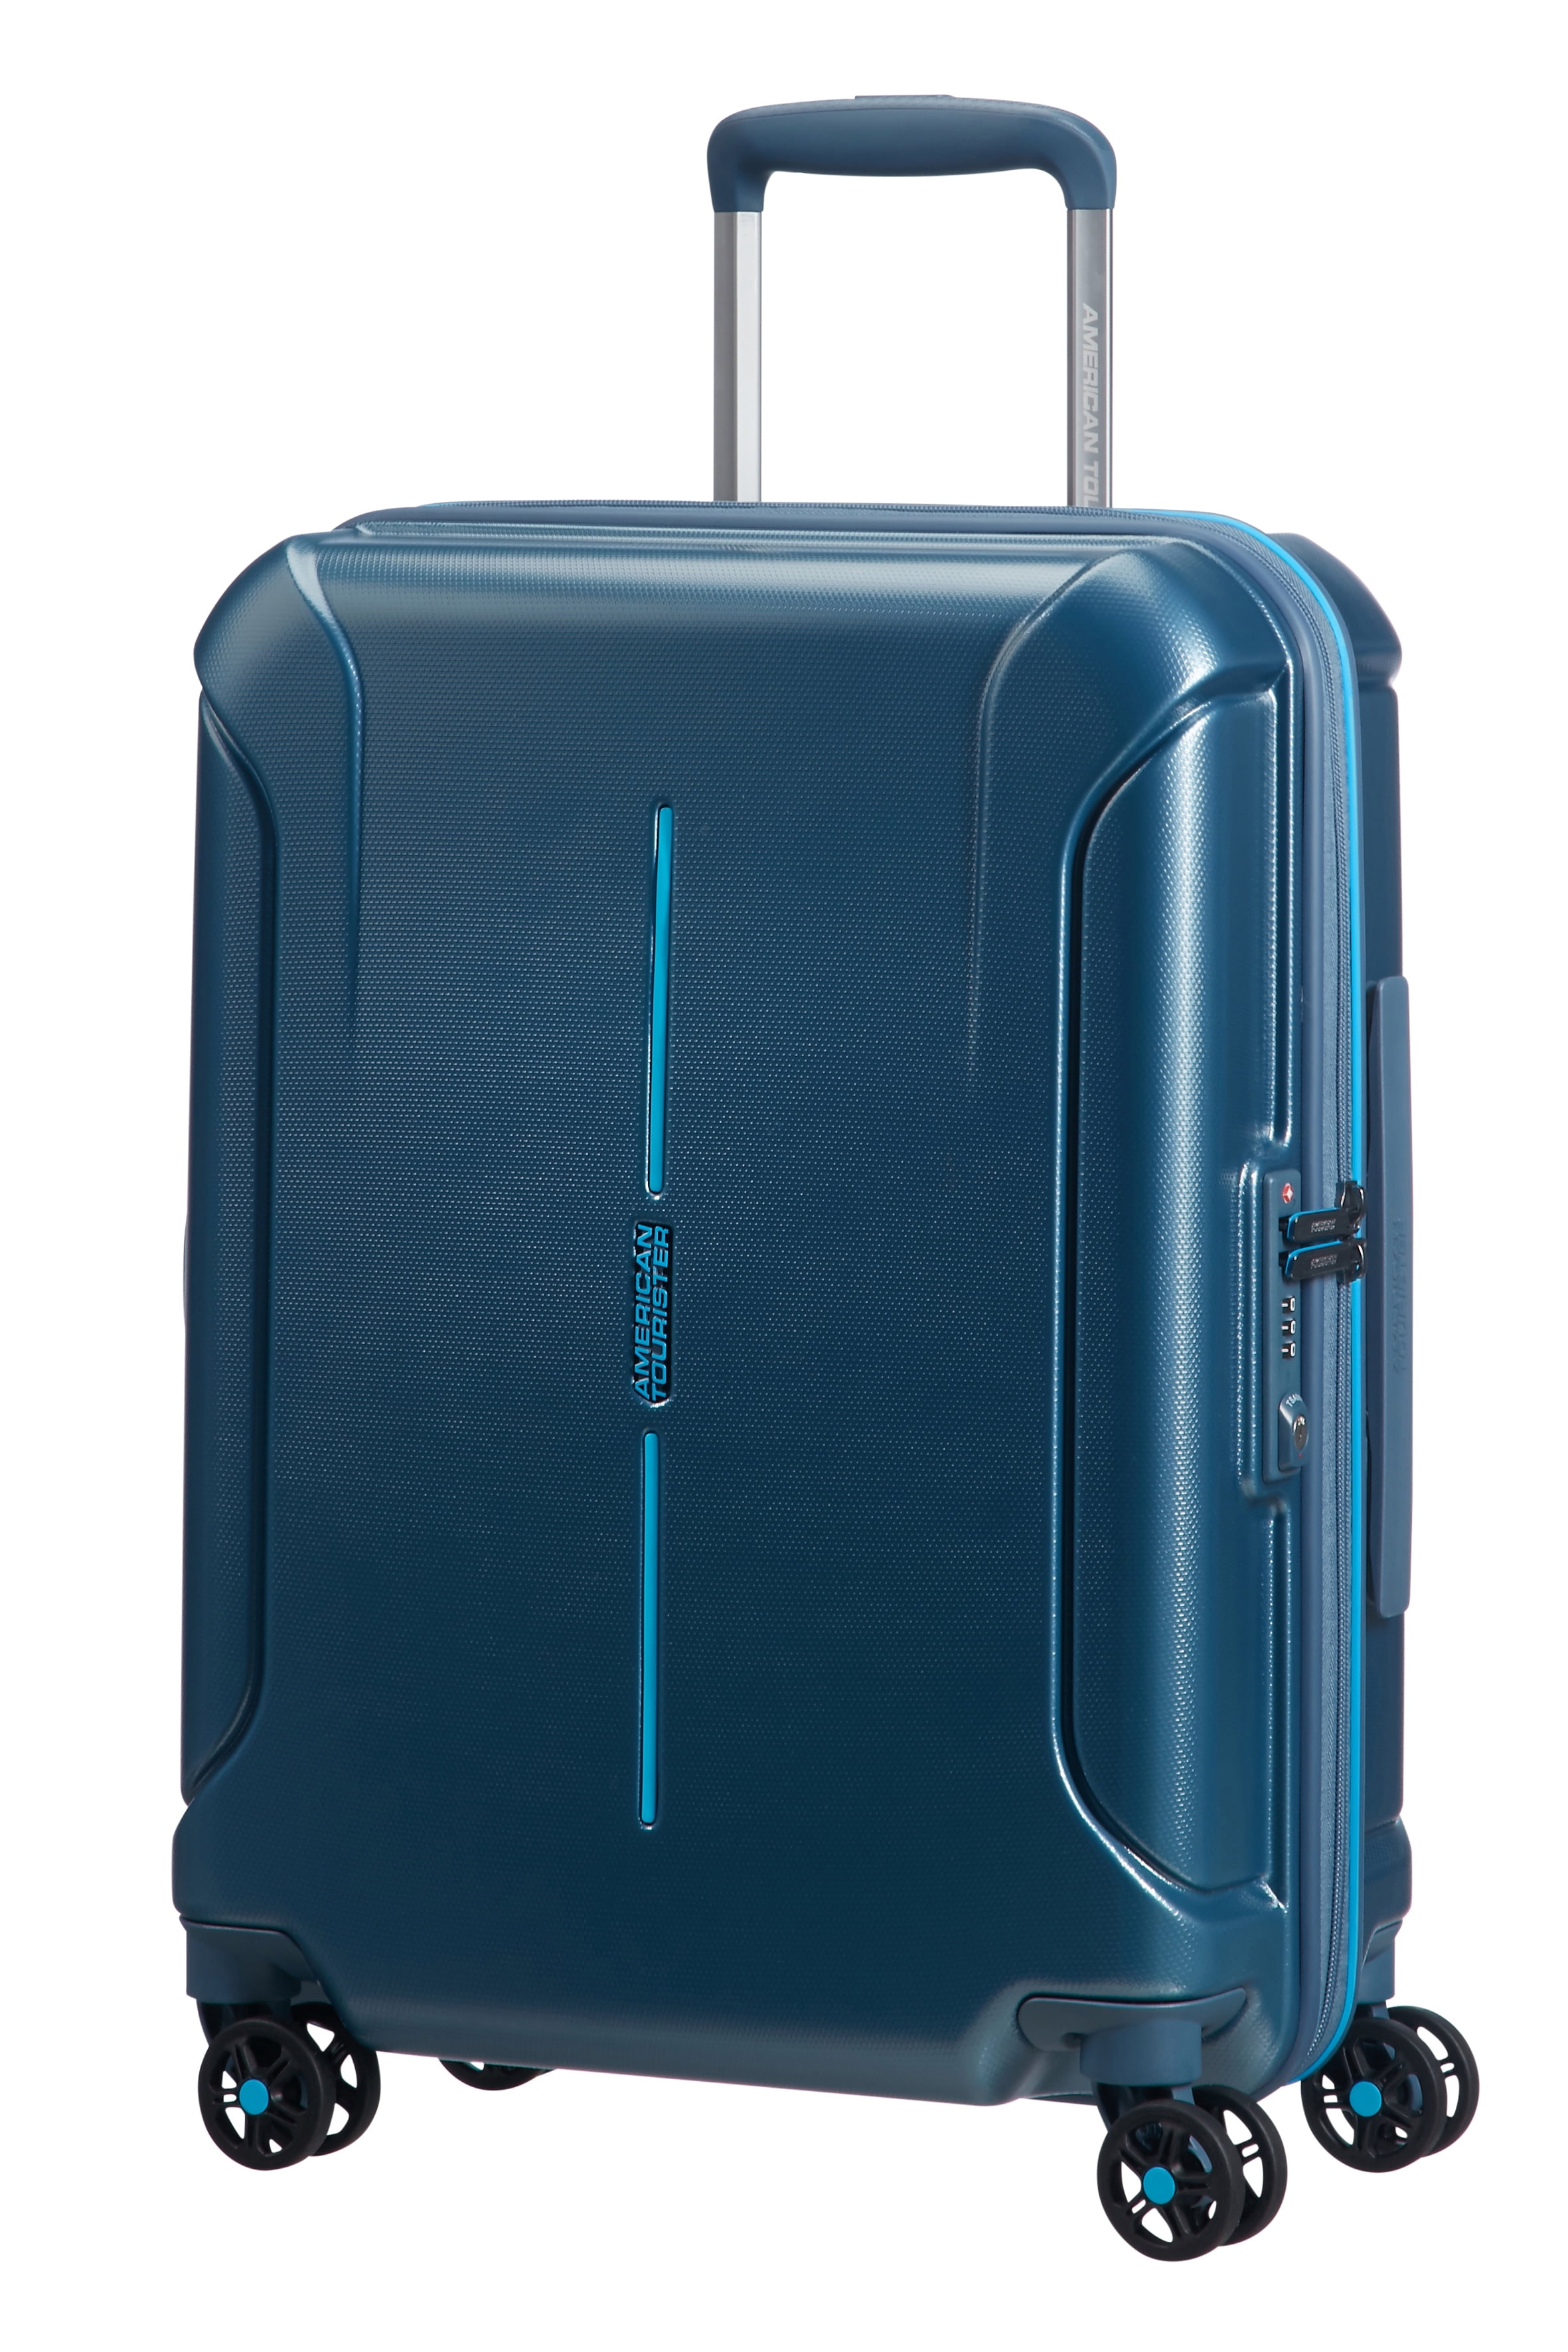 american traveller luggage review